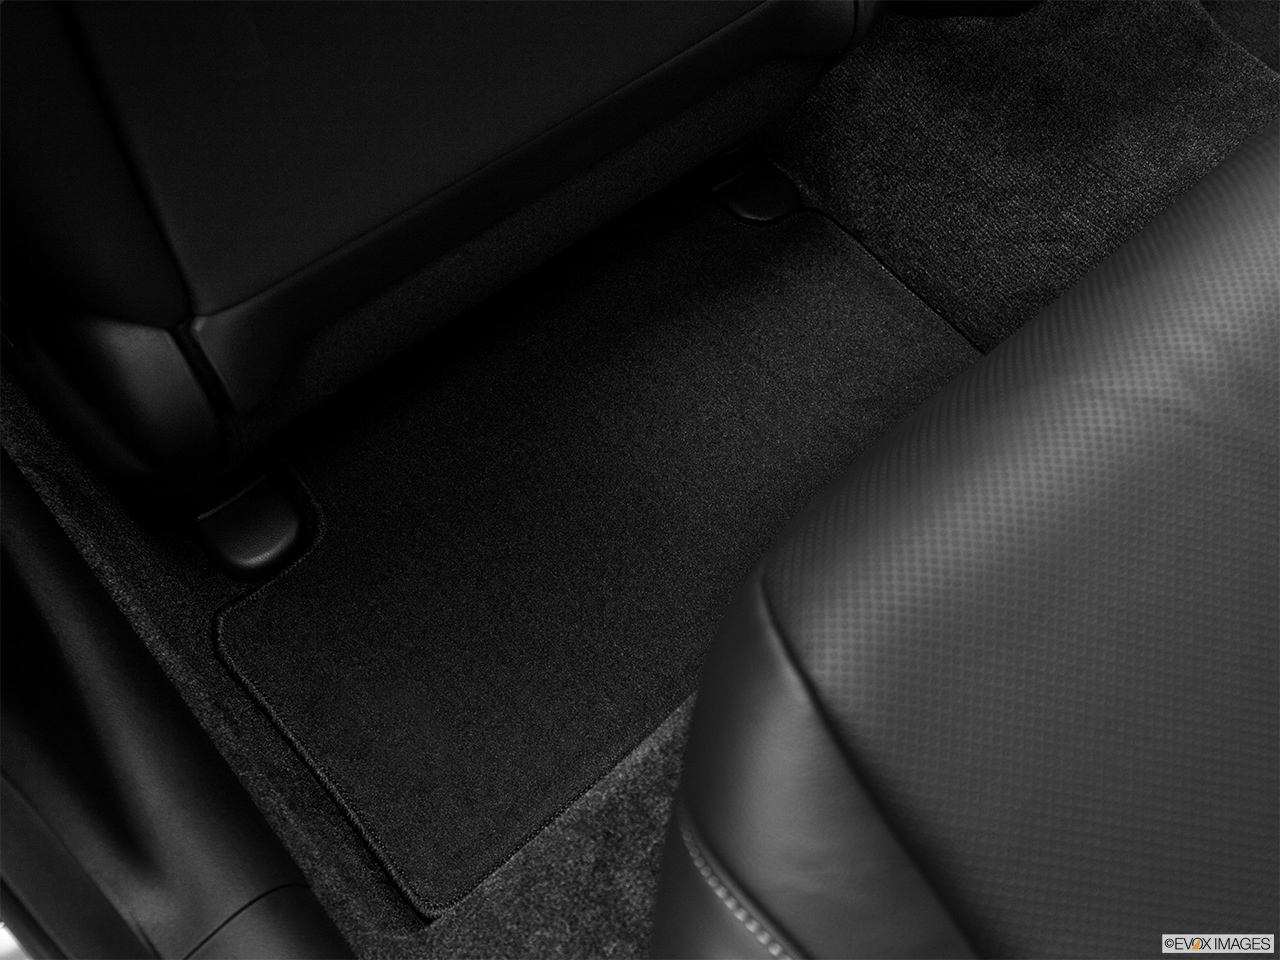 2012 Acura TSX TSX 5-speed Automatic Rear driver's side floor mat. Mid-seat level from outside looking in. 